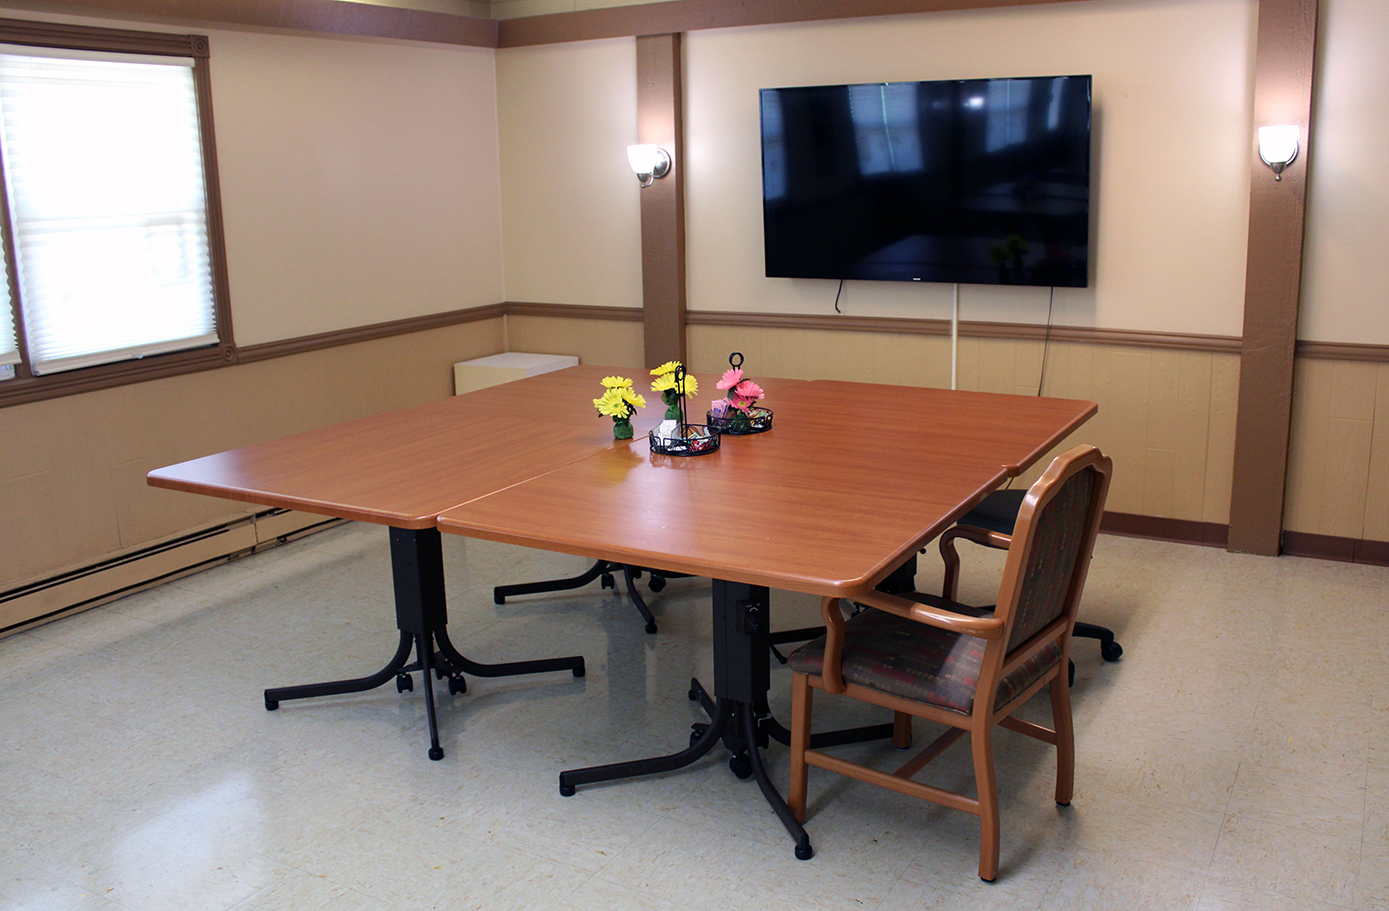 Brickyard Healthcare Knox Care Center meeting area with TV, table, and chairs